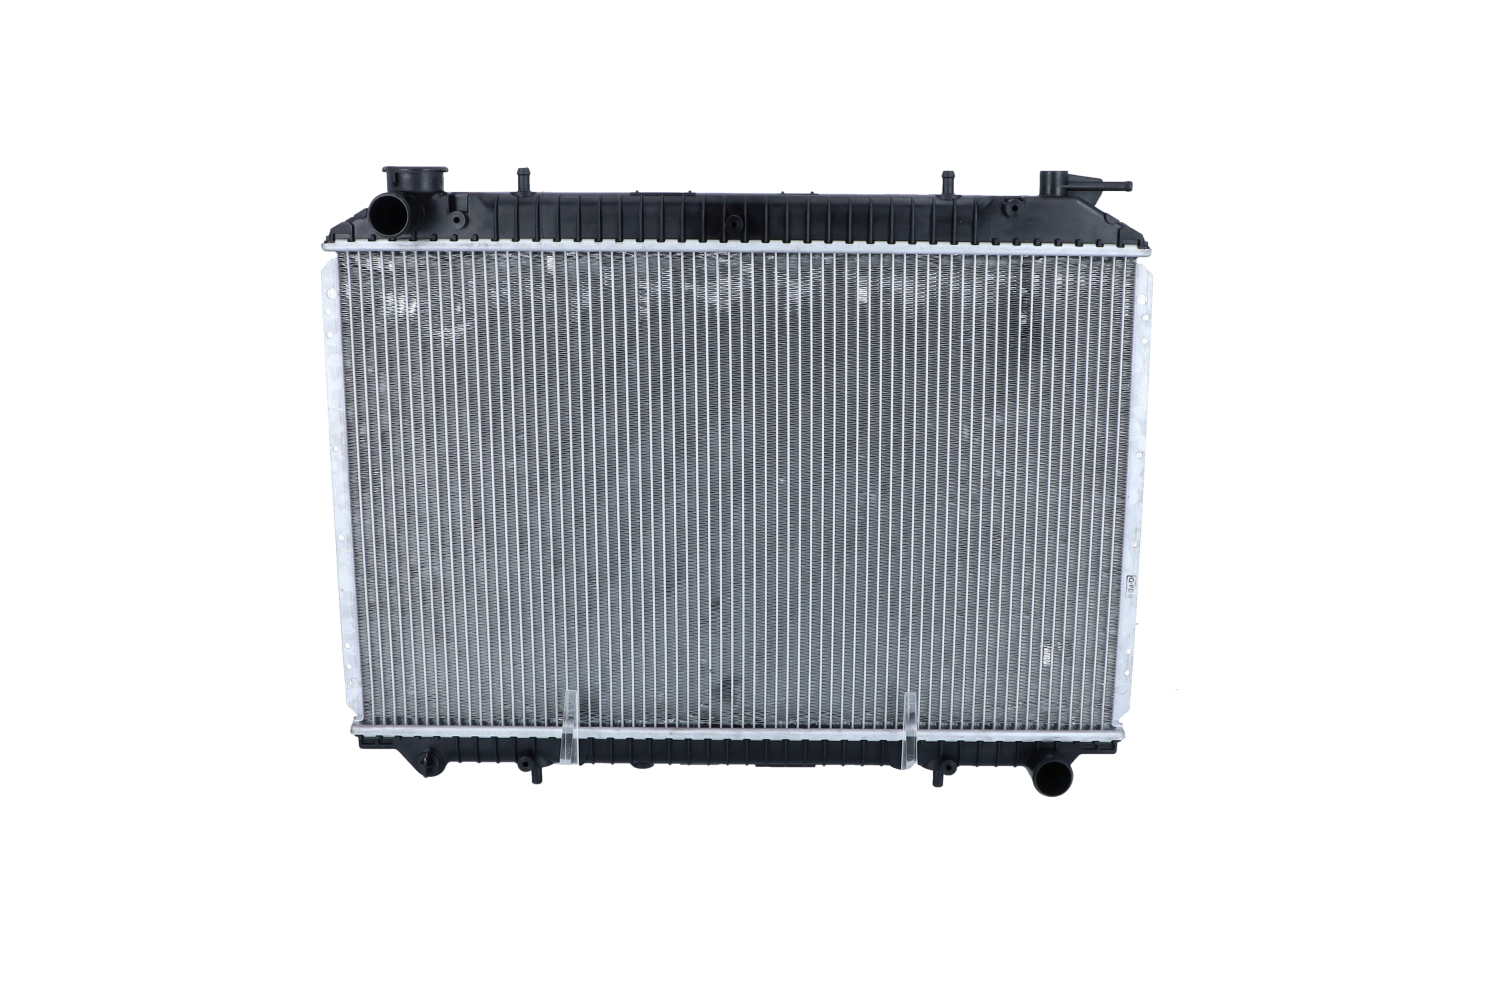 NRF 519534 Engine radiator Aluminium, 703 x 422 x 30 mm, with mounting parts, Brazed cooling fins